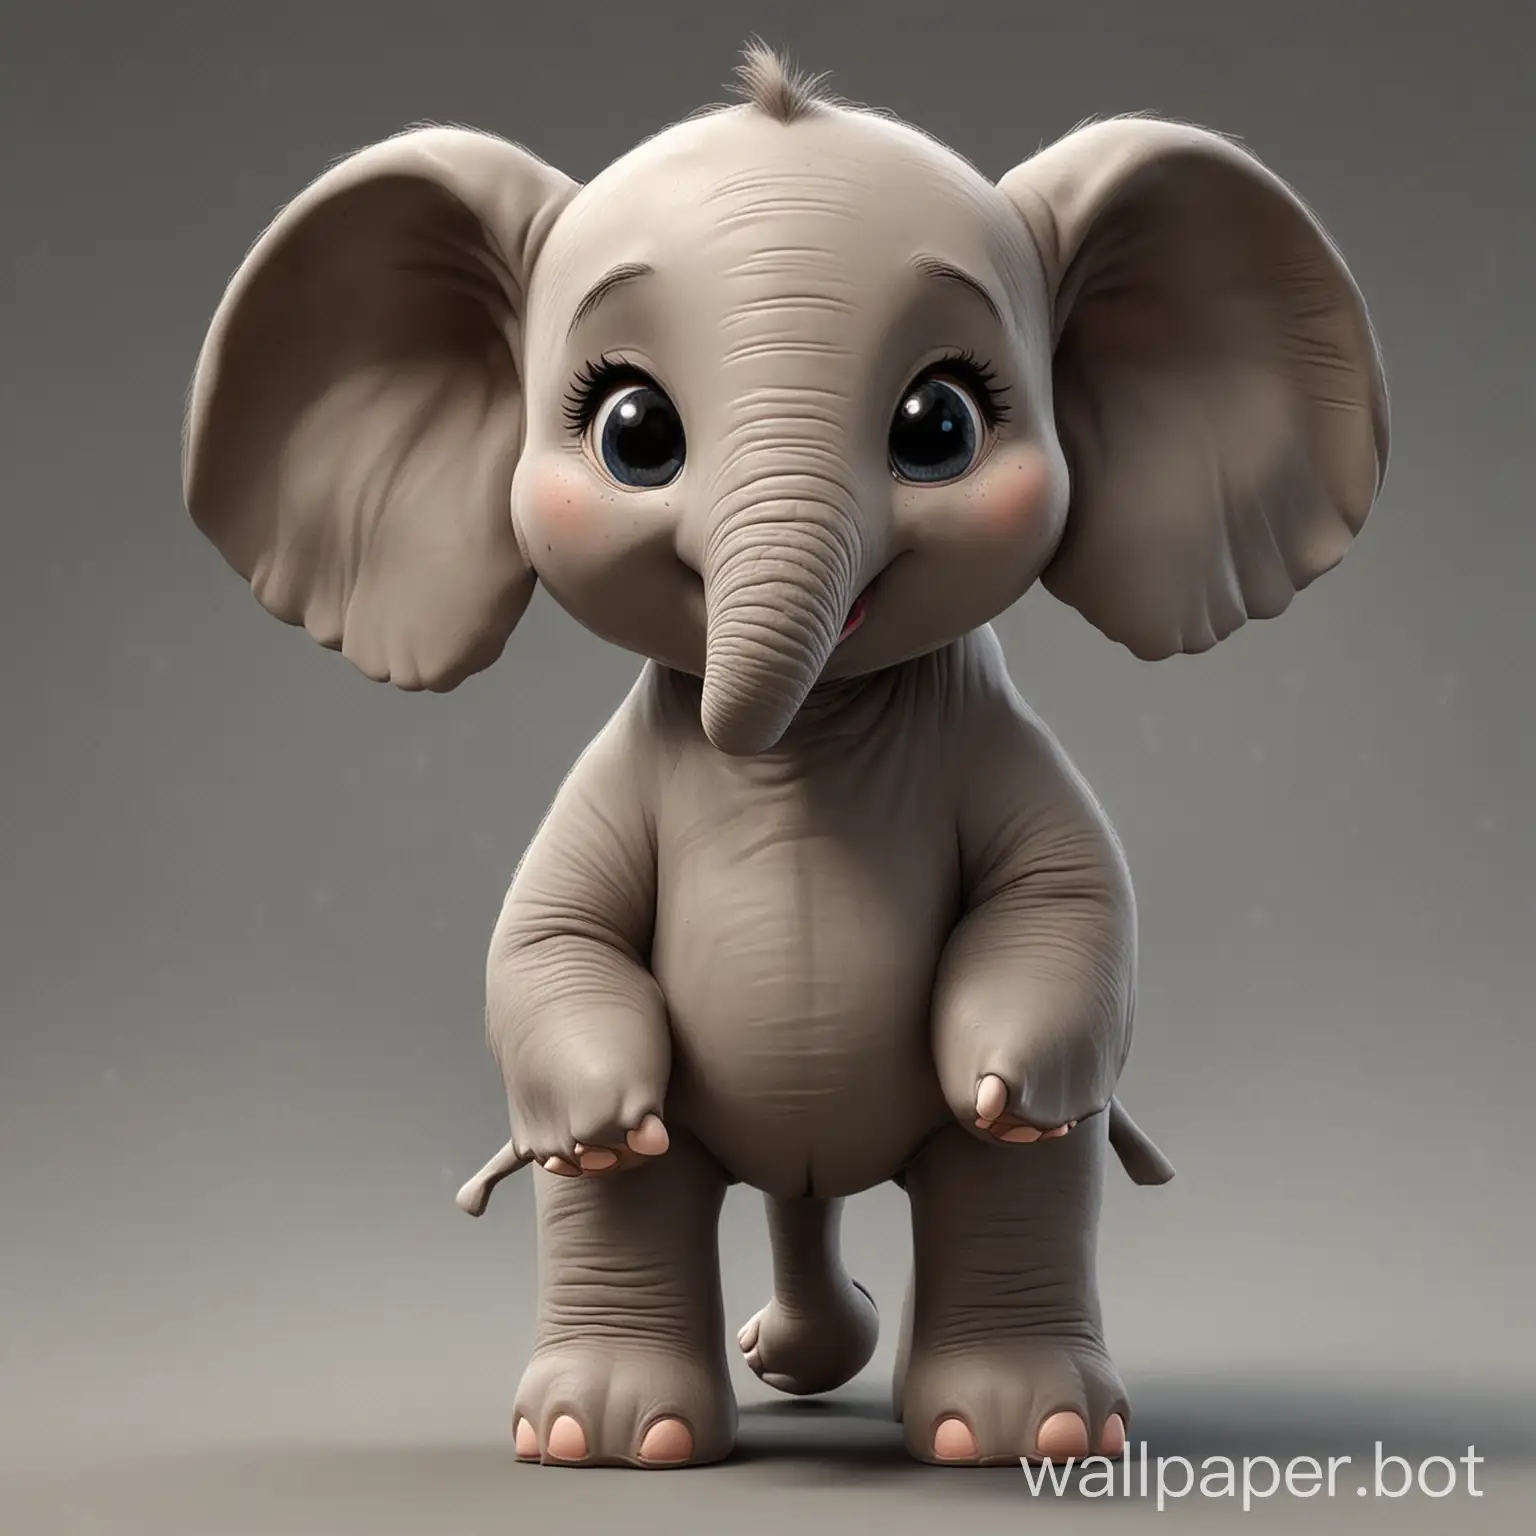 Cartoon-Baby-Elephant-3D-Sculpture-Reference